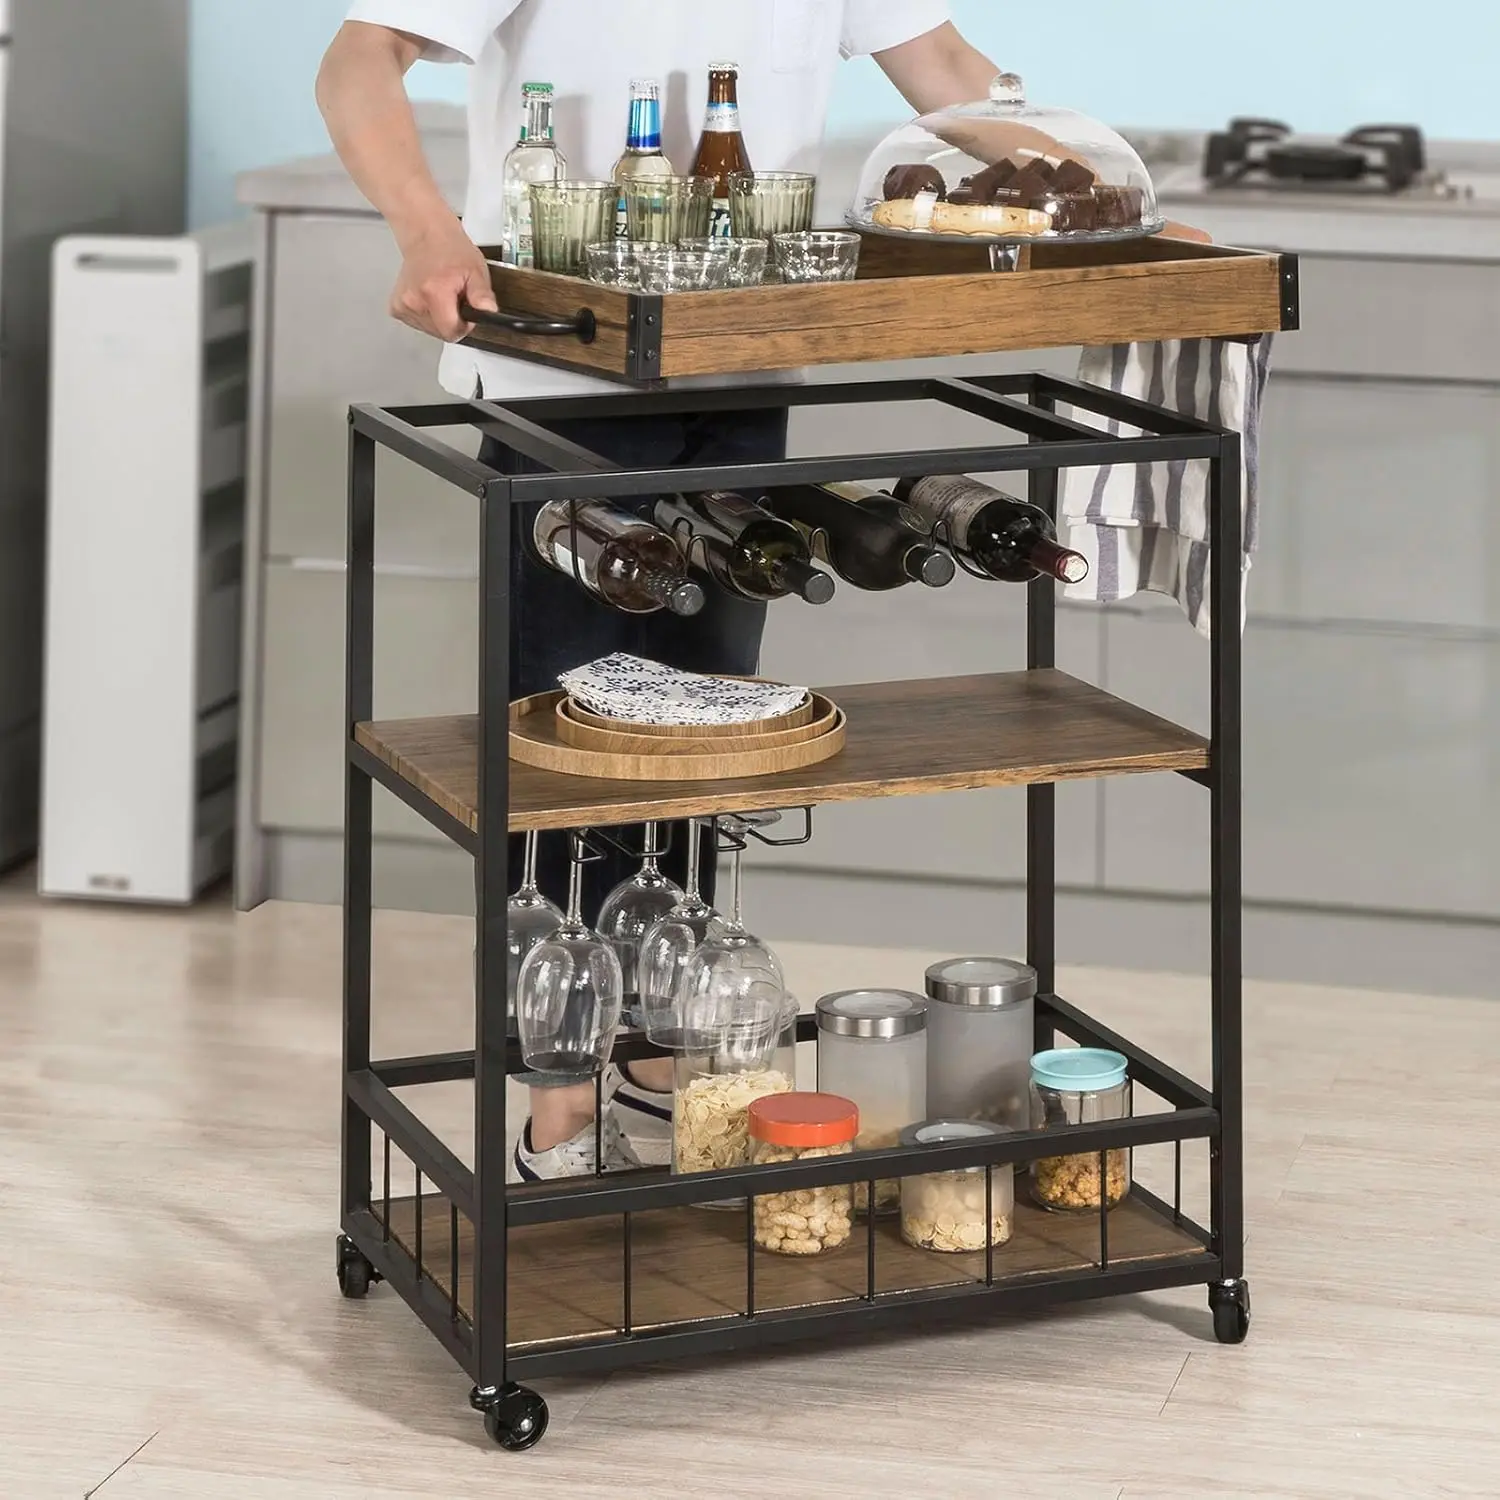 

Home Myra Rustic Mobile Kitchen Serving cart with Removable Tray, Industrial Vintage Style Wood Metal Serving Trolley,